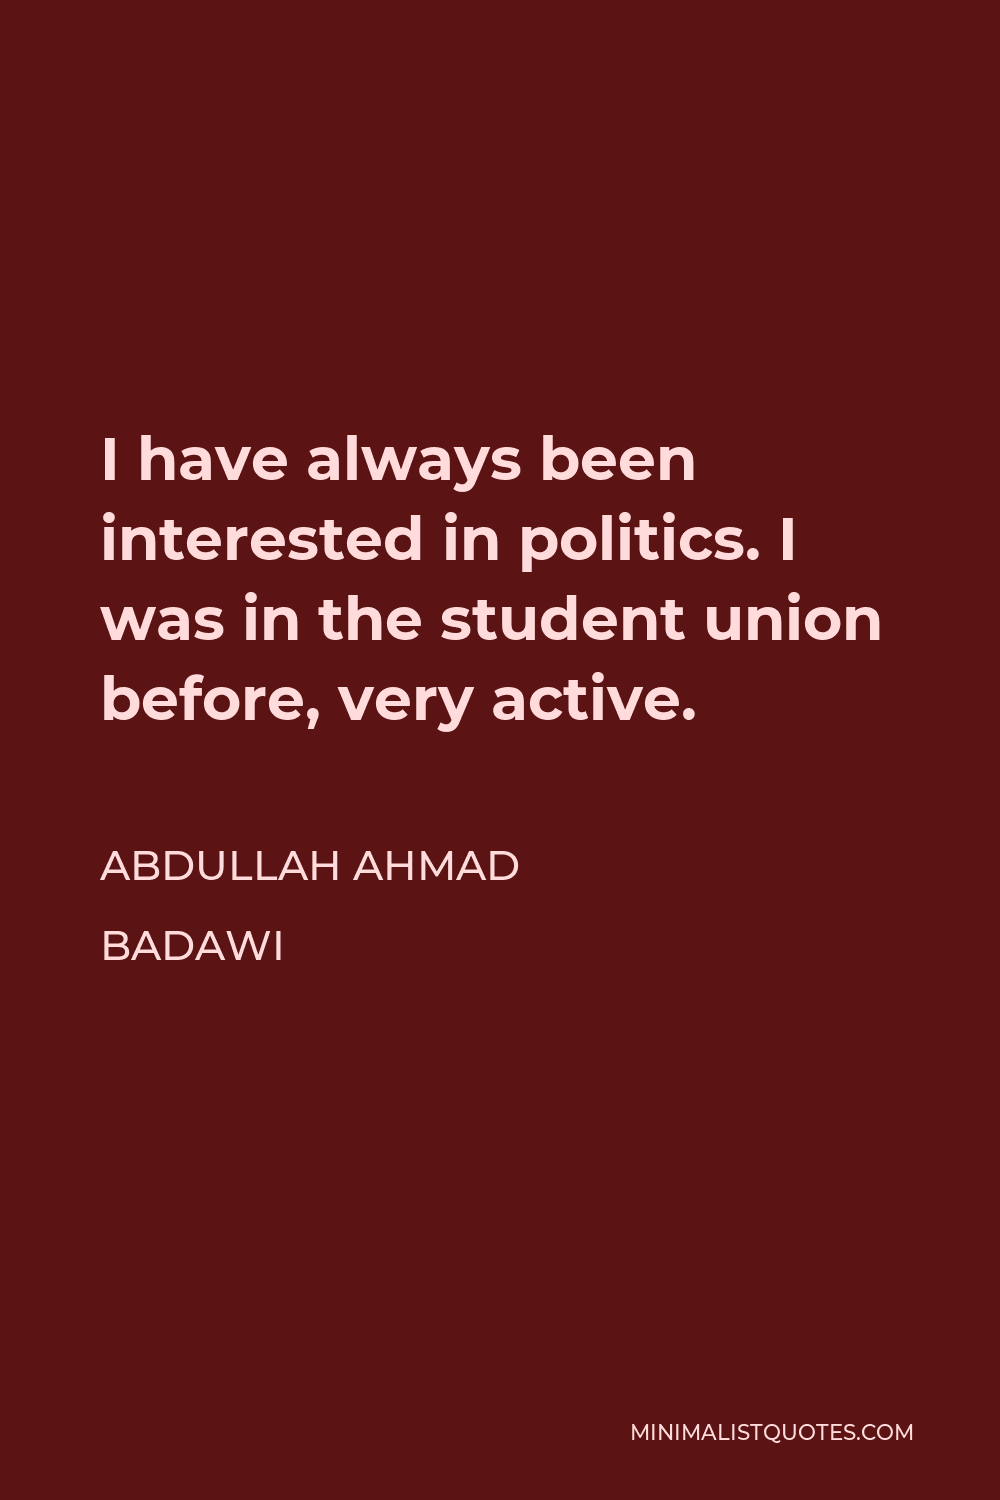 Abdullah Ahmad Badawi Quote - I have always been interested in politics. I was in the student union before, very active.